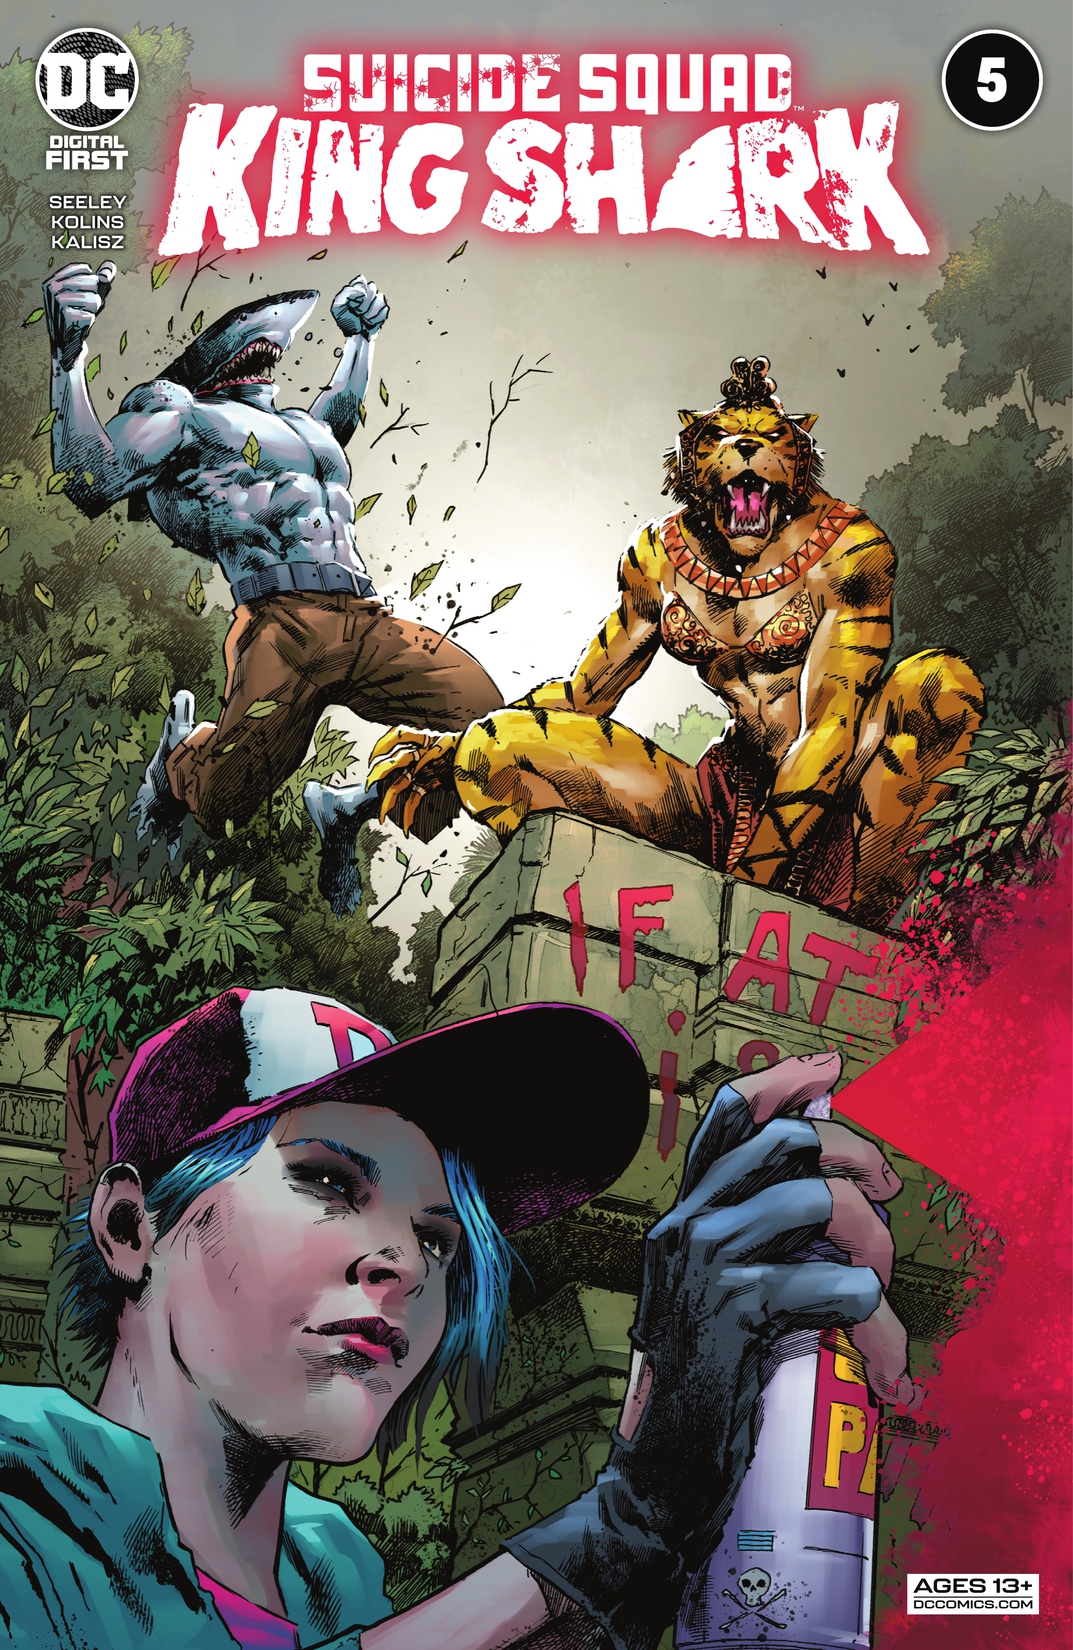 Suicide Squad: King Shark #5 preview images